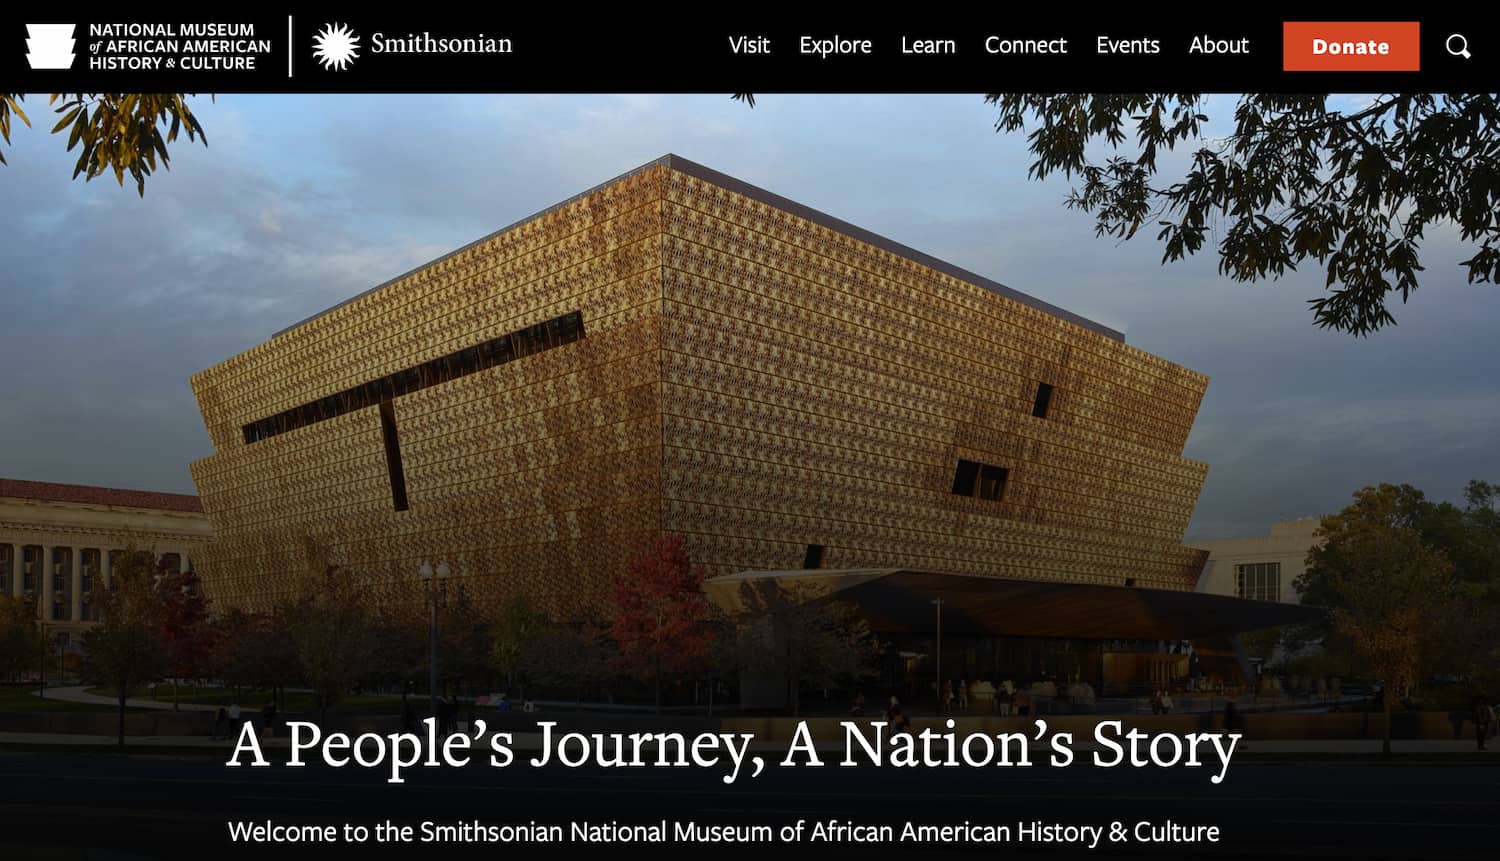 homepage for the museum website the national museum of african american history and culture